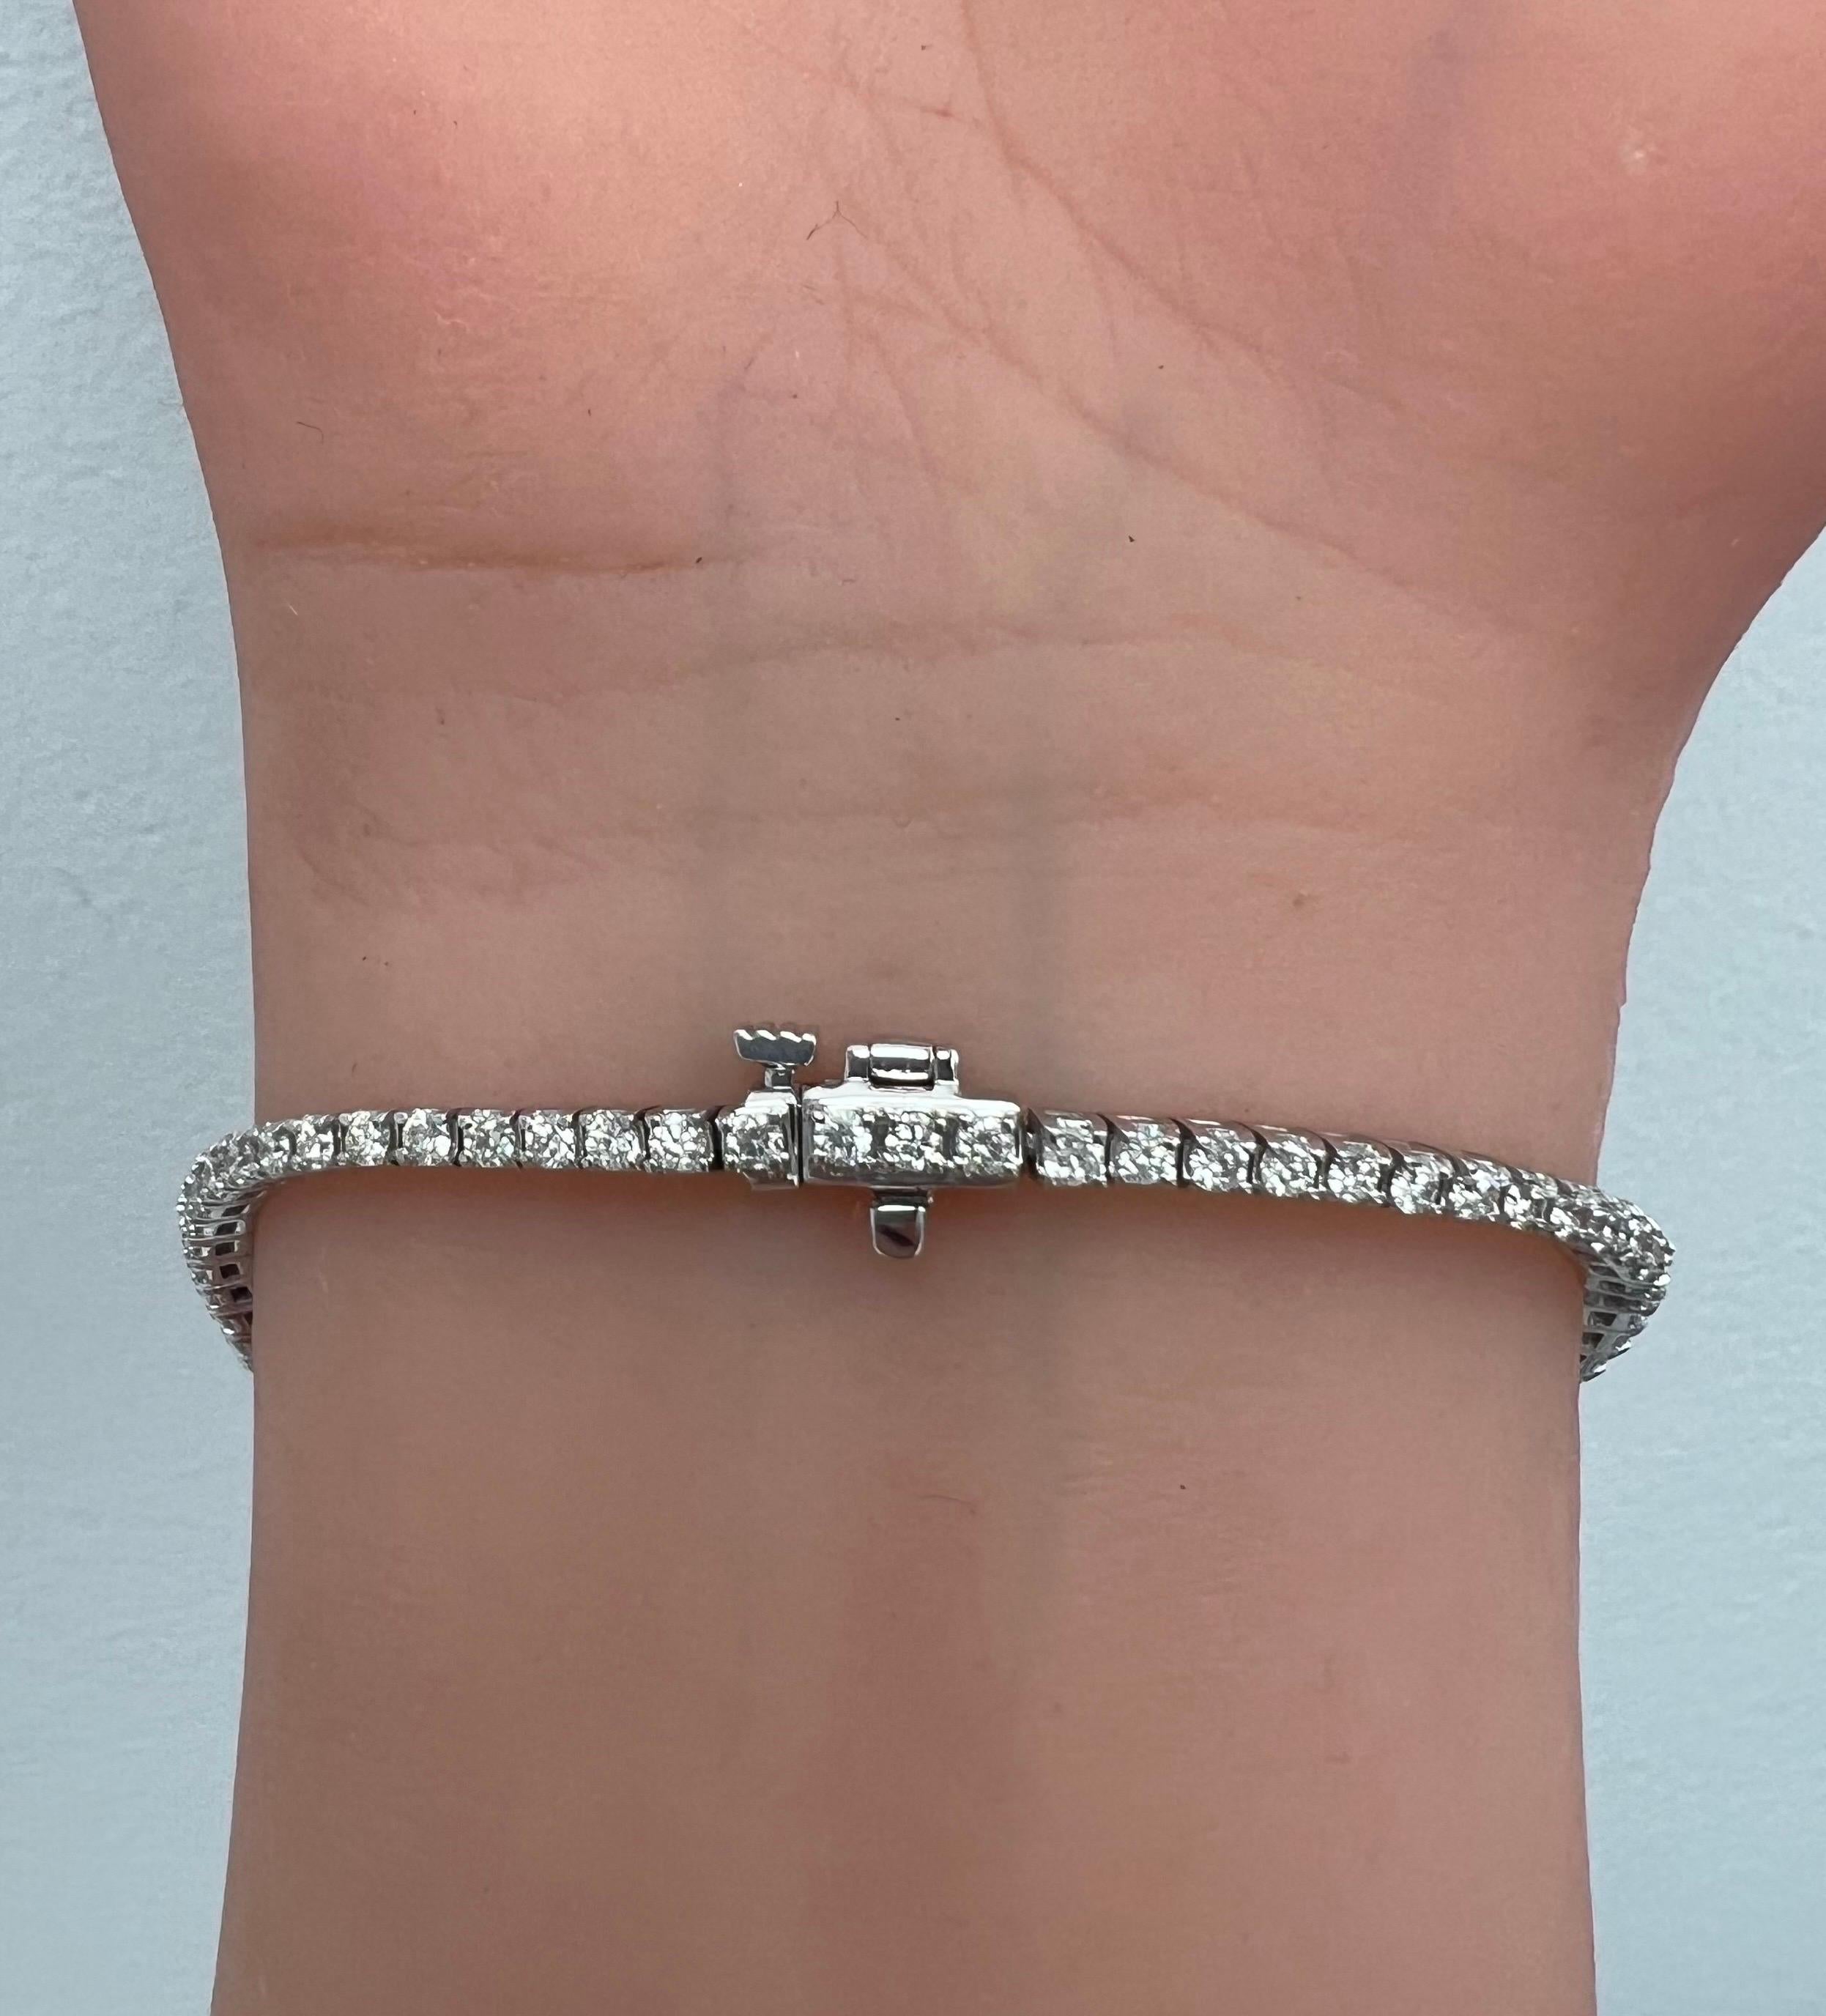 14k White Gold Tennis Bracelet with Natural Full Cut Diamonds- G/H Vs/Si1 - 2ct In New Condition For Sale In Great Neck, NY